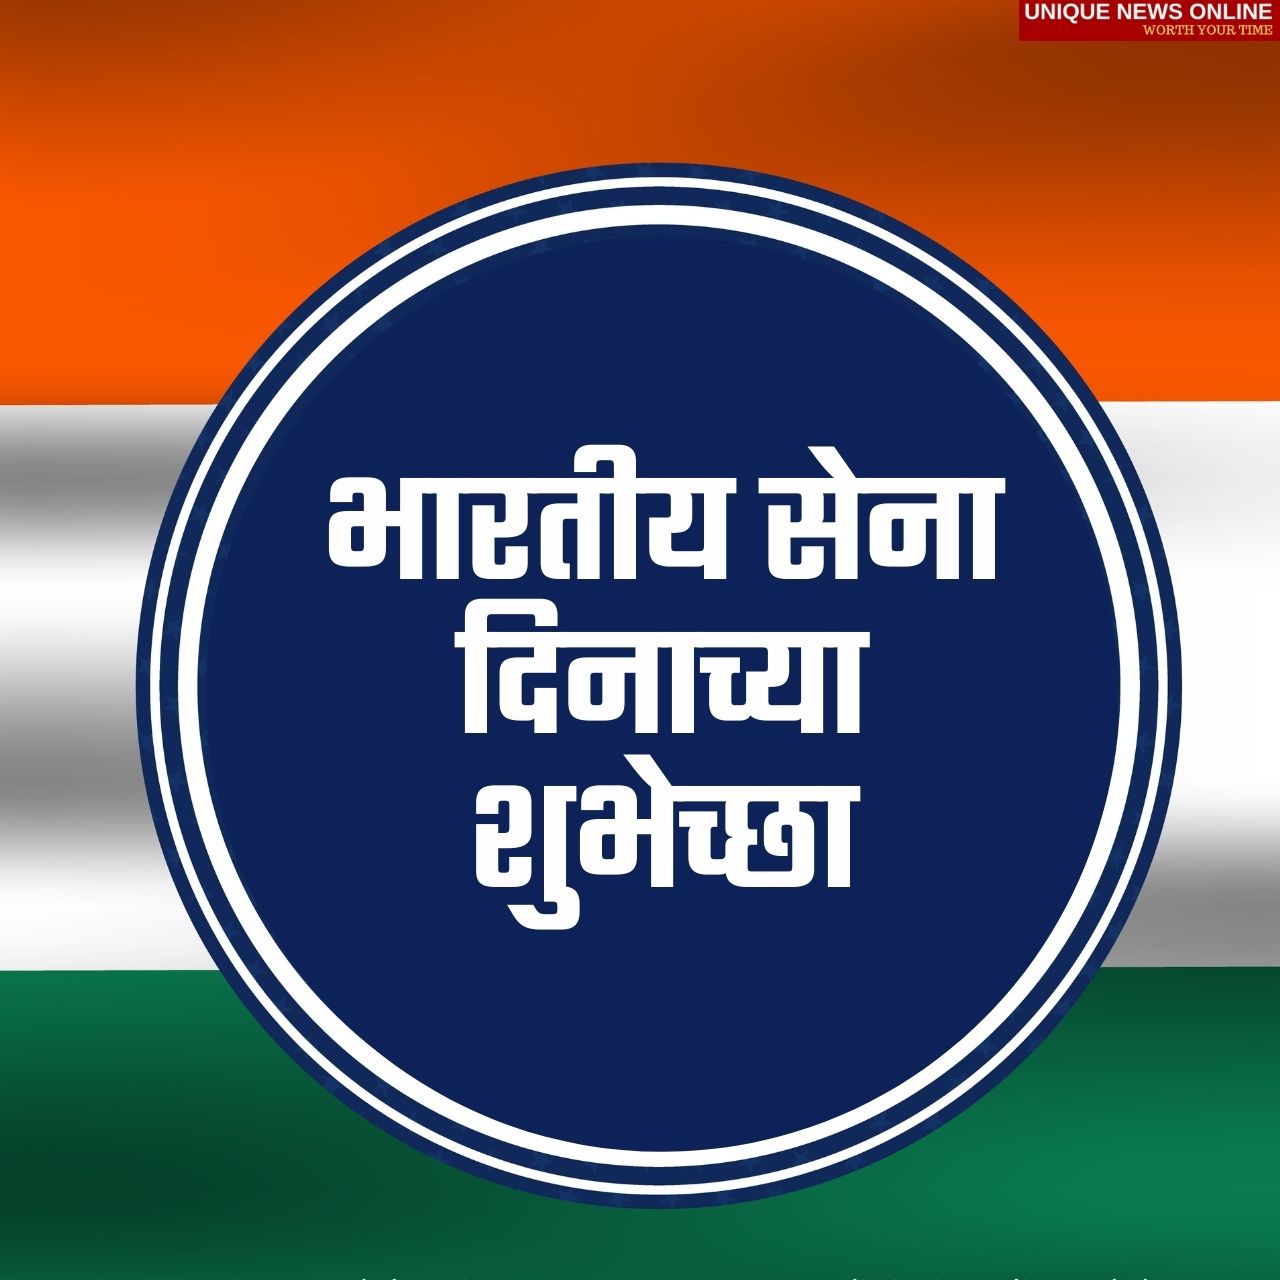 Indian Army Day 2022: Marathi Quotes, Wishes, HD Images, Messages, Greetings, and Slogans to honor 2nd Larget military force of the Planet